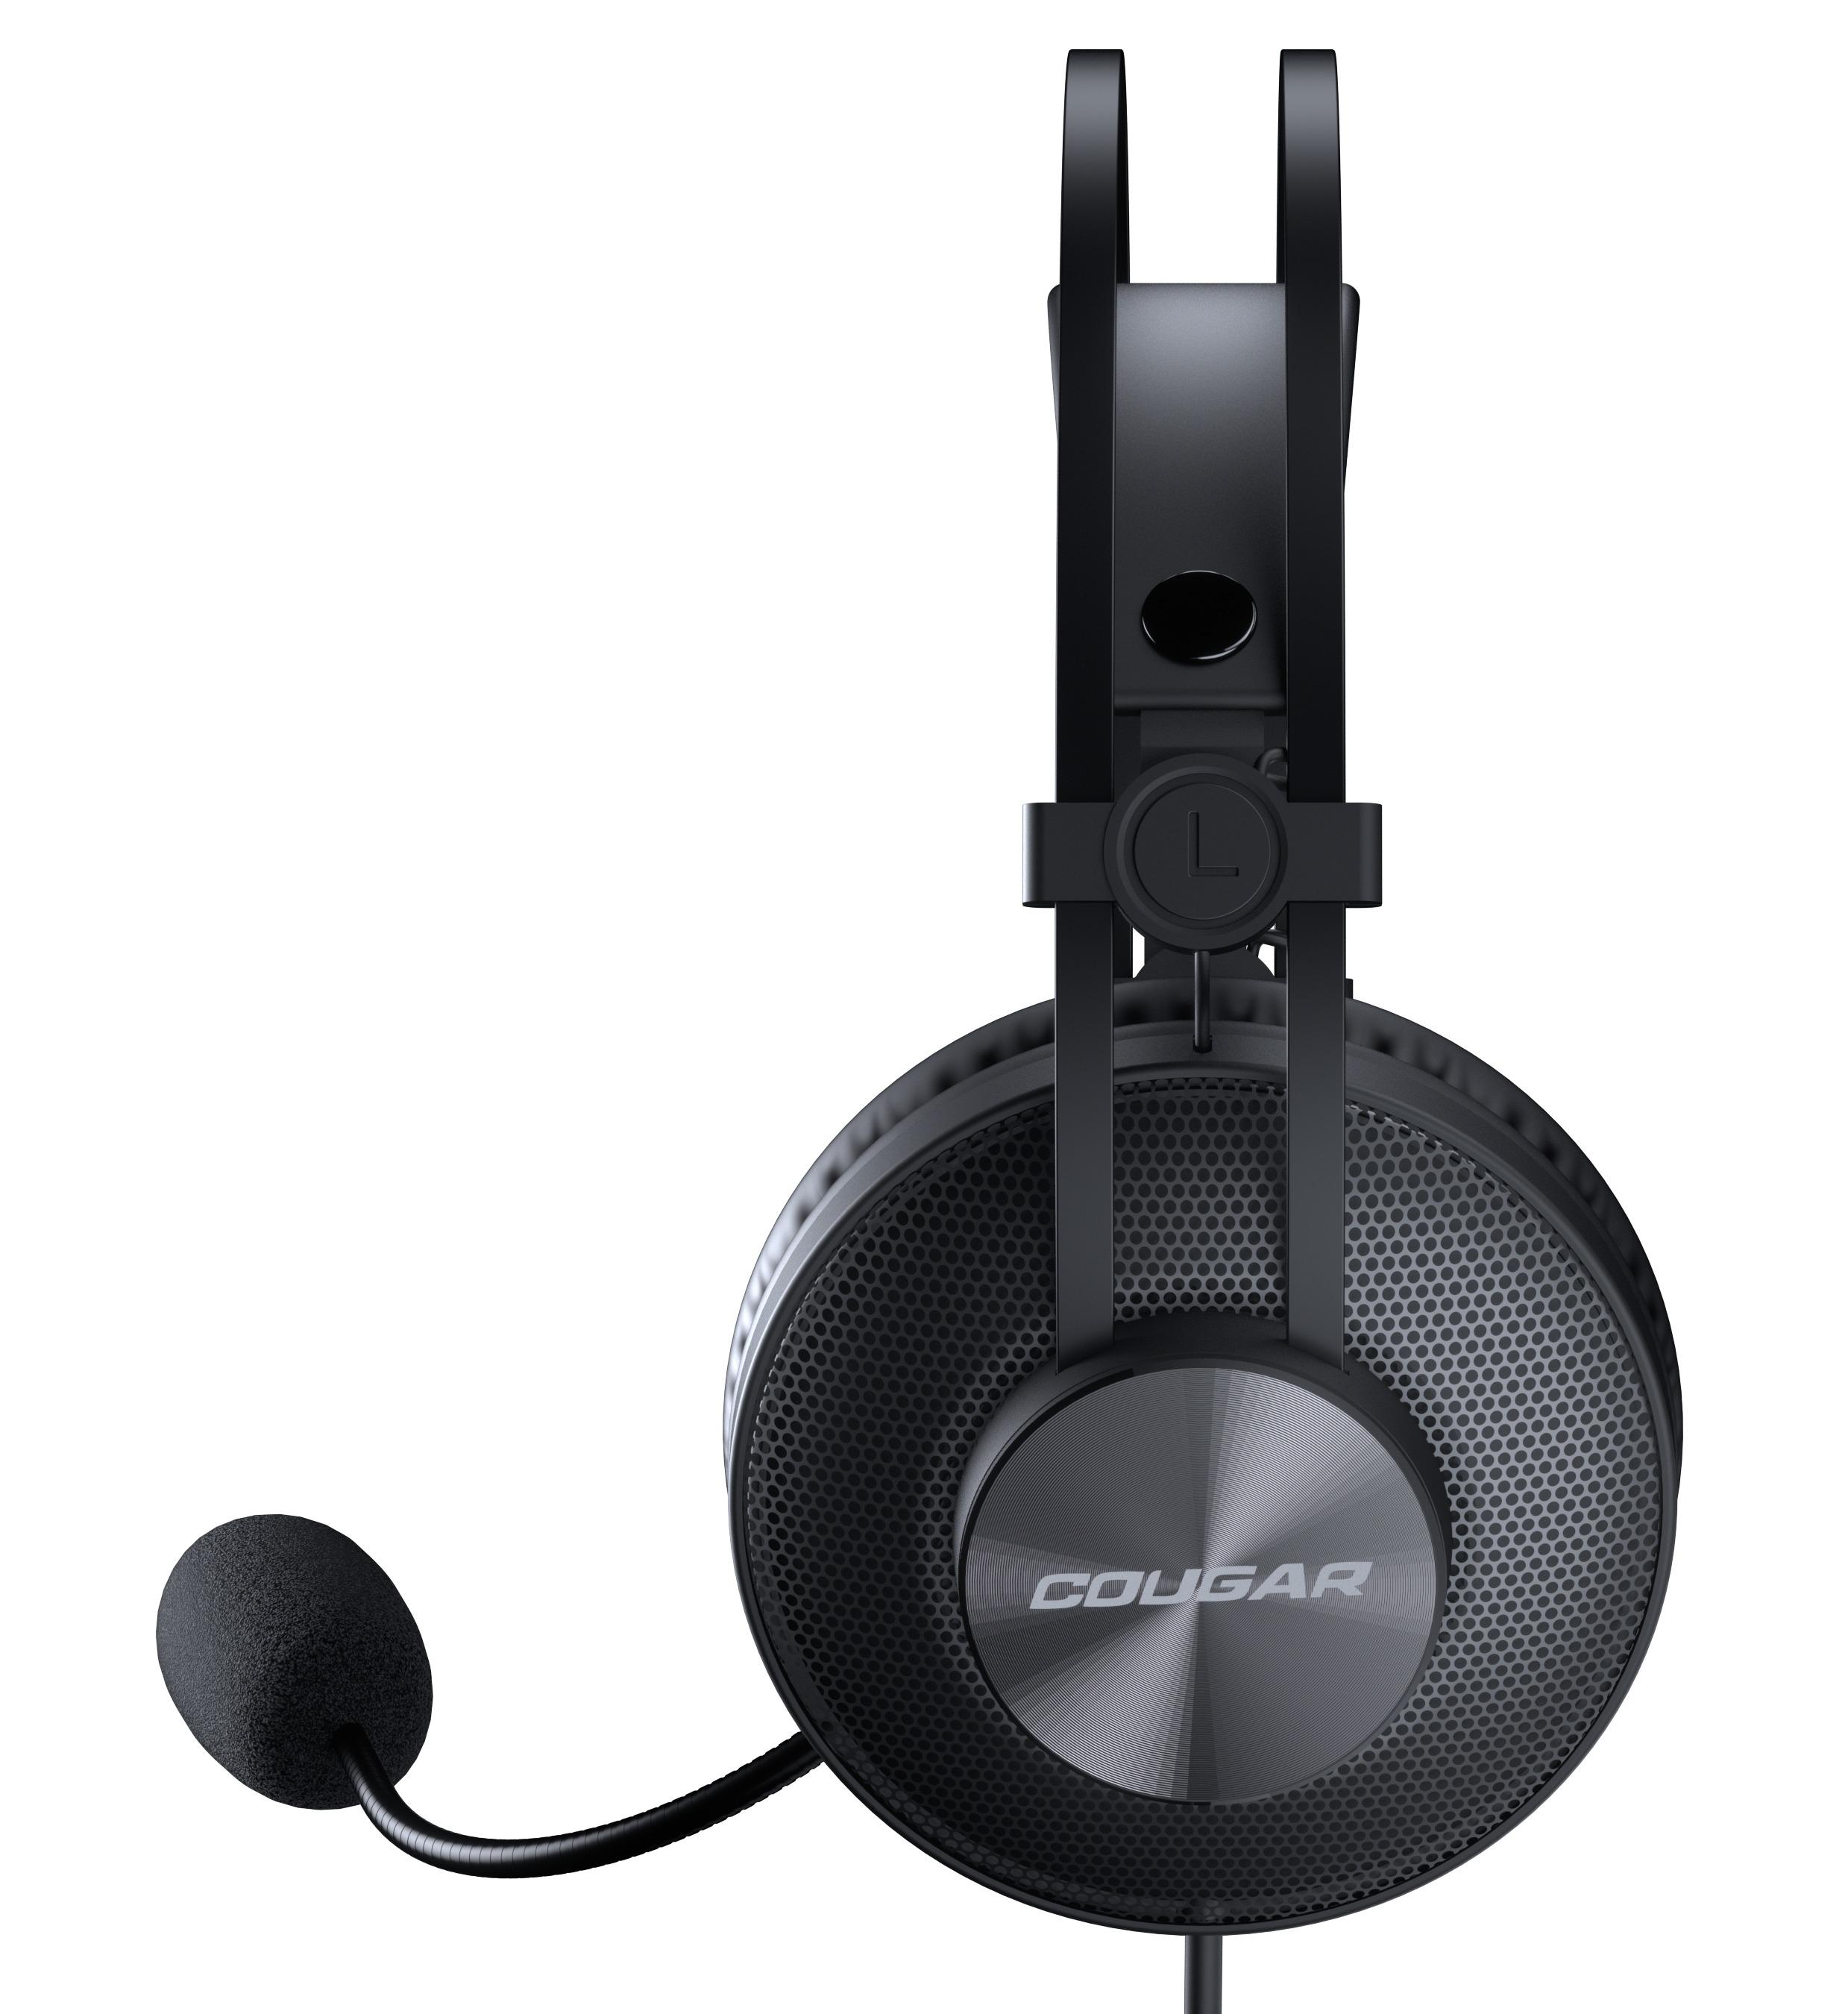 Schwarz Headset Essential, COUGAR Over-ear Immersa Gaming